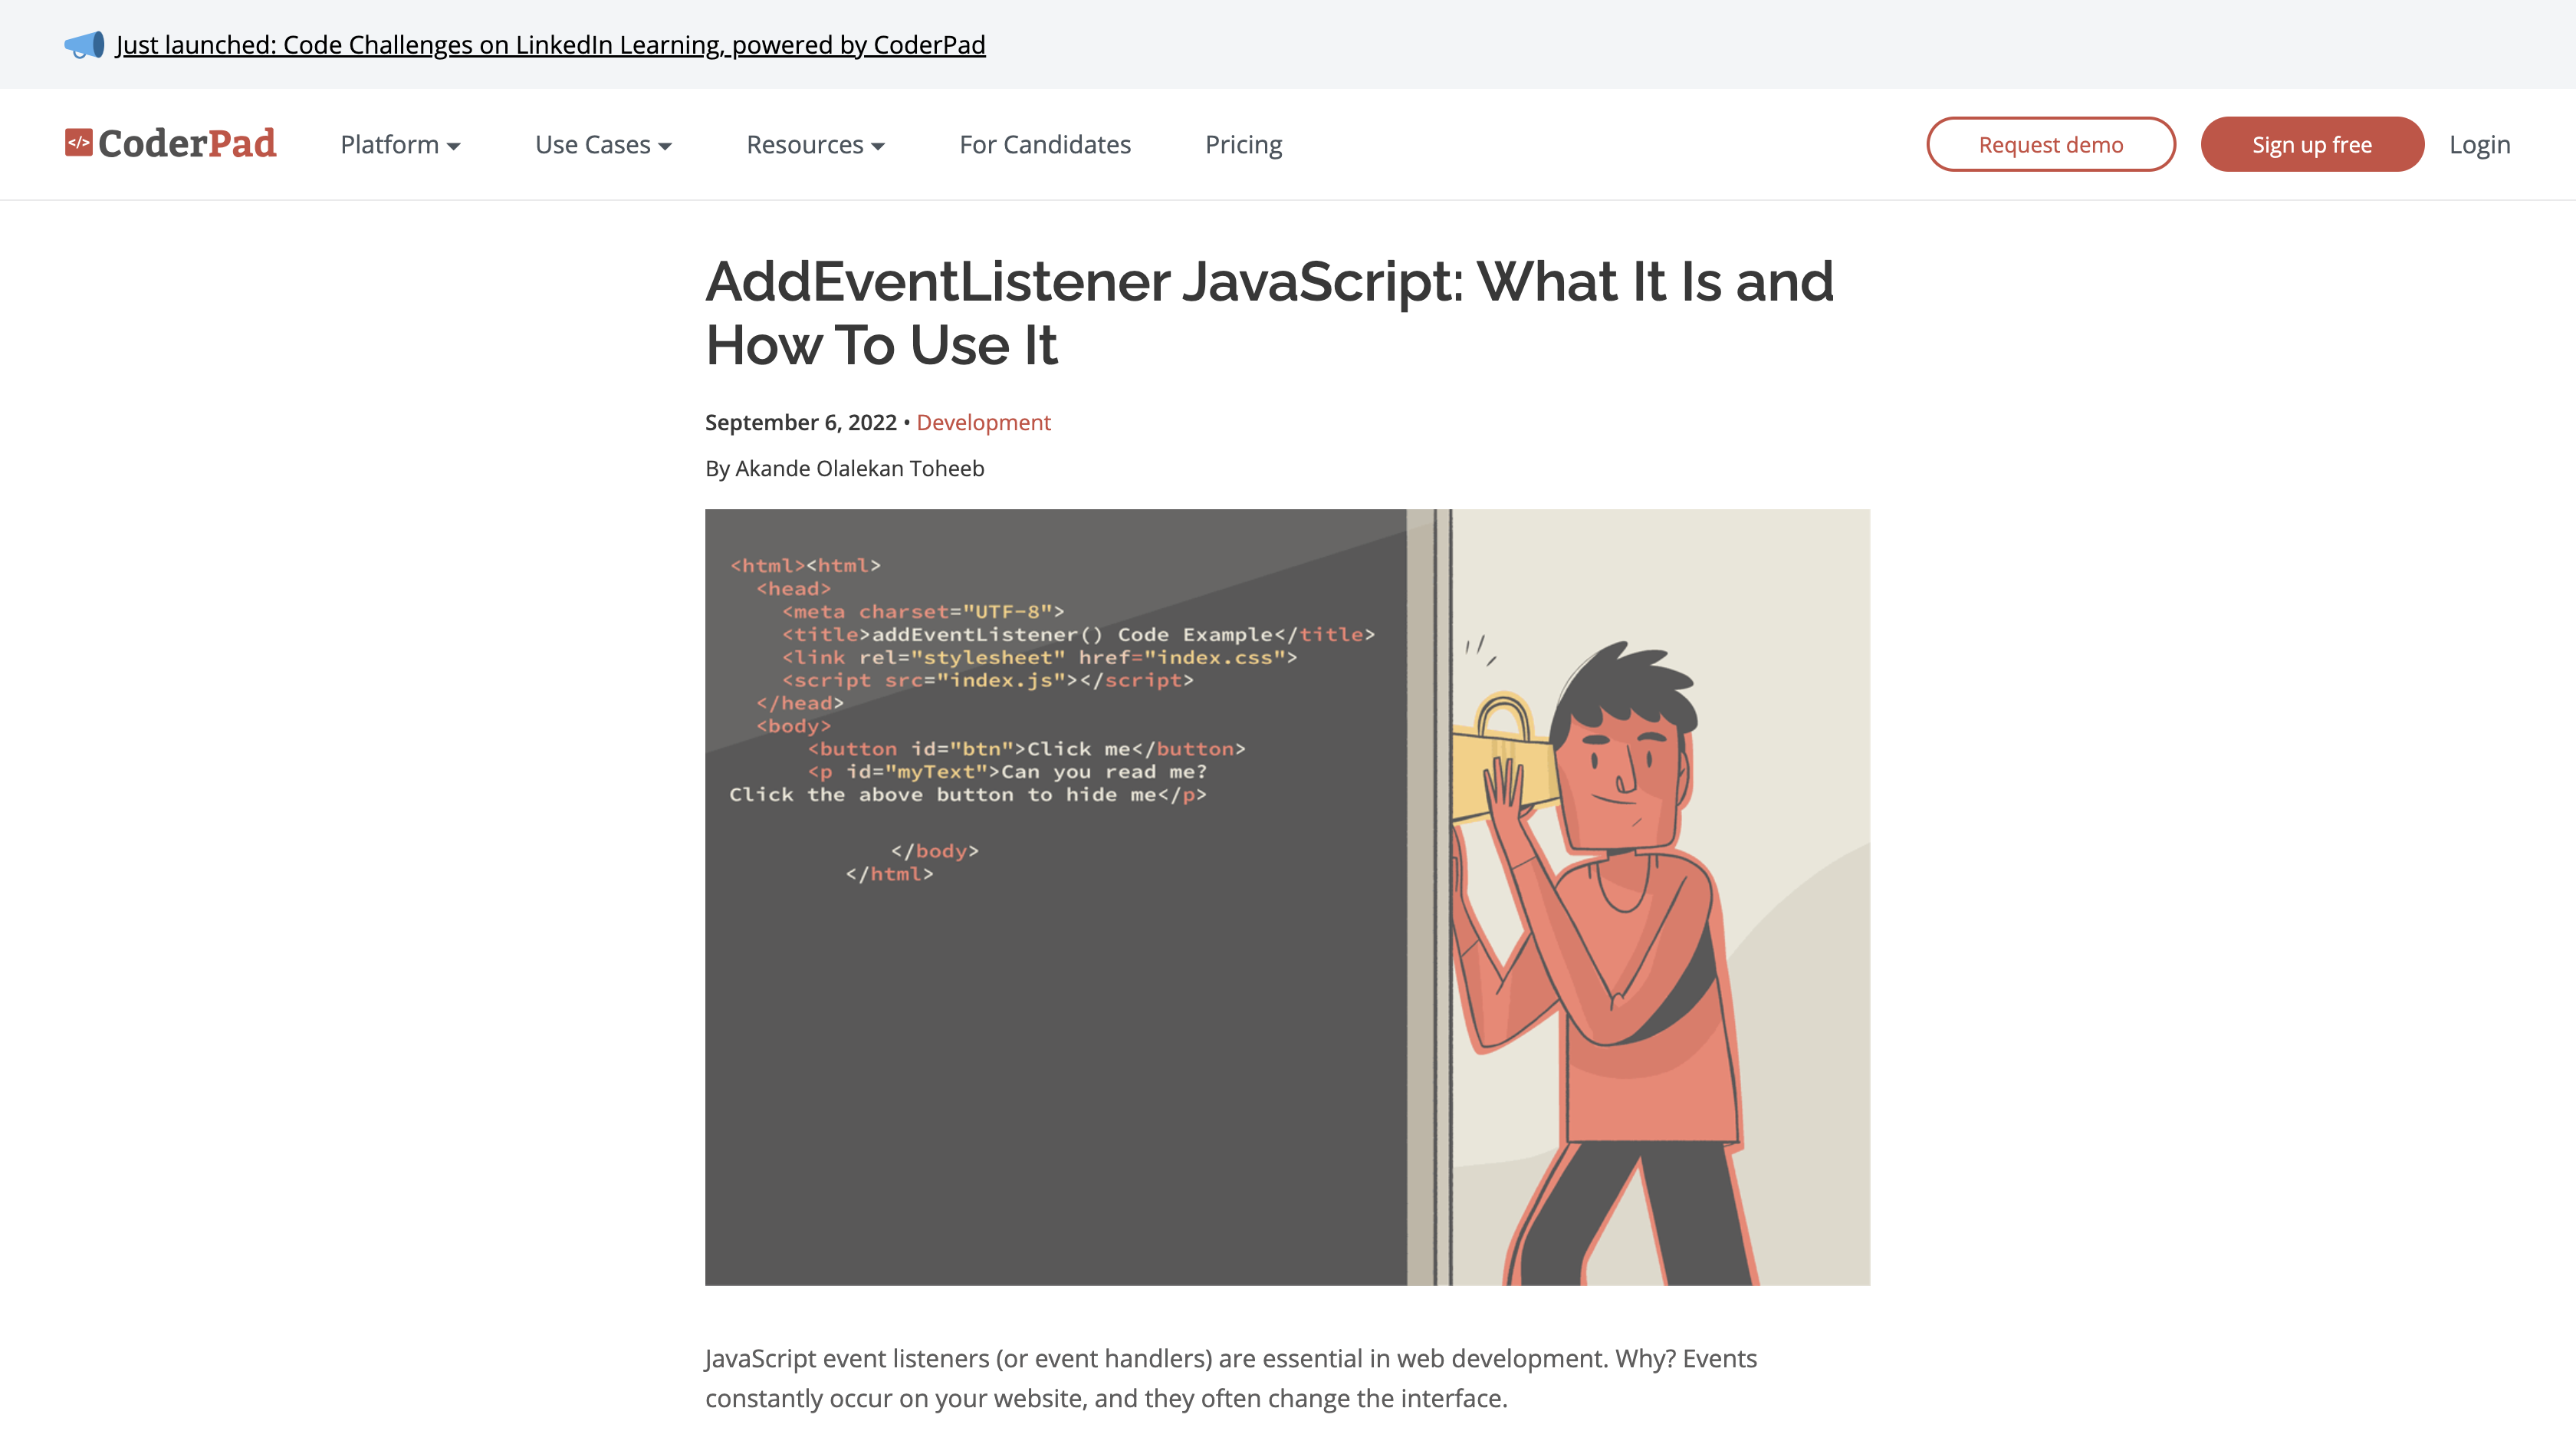 AddEventListener JavaScript: What It Is and How To Use It